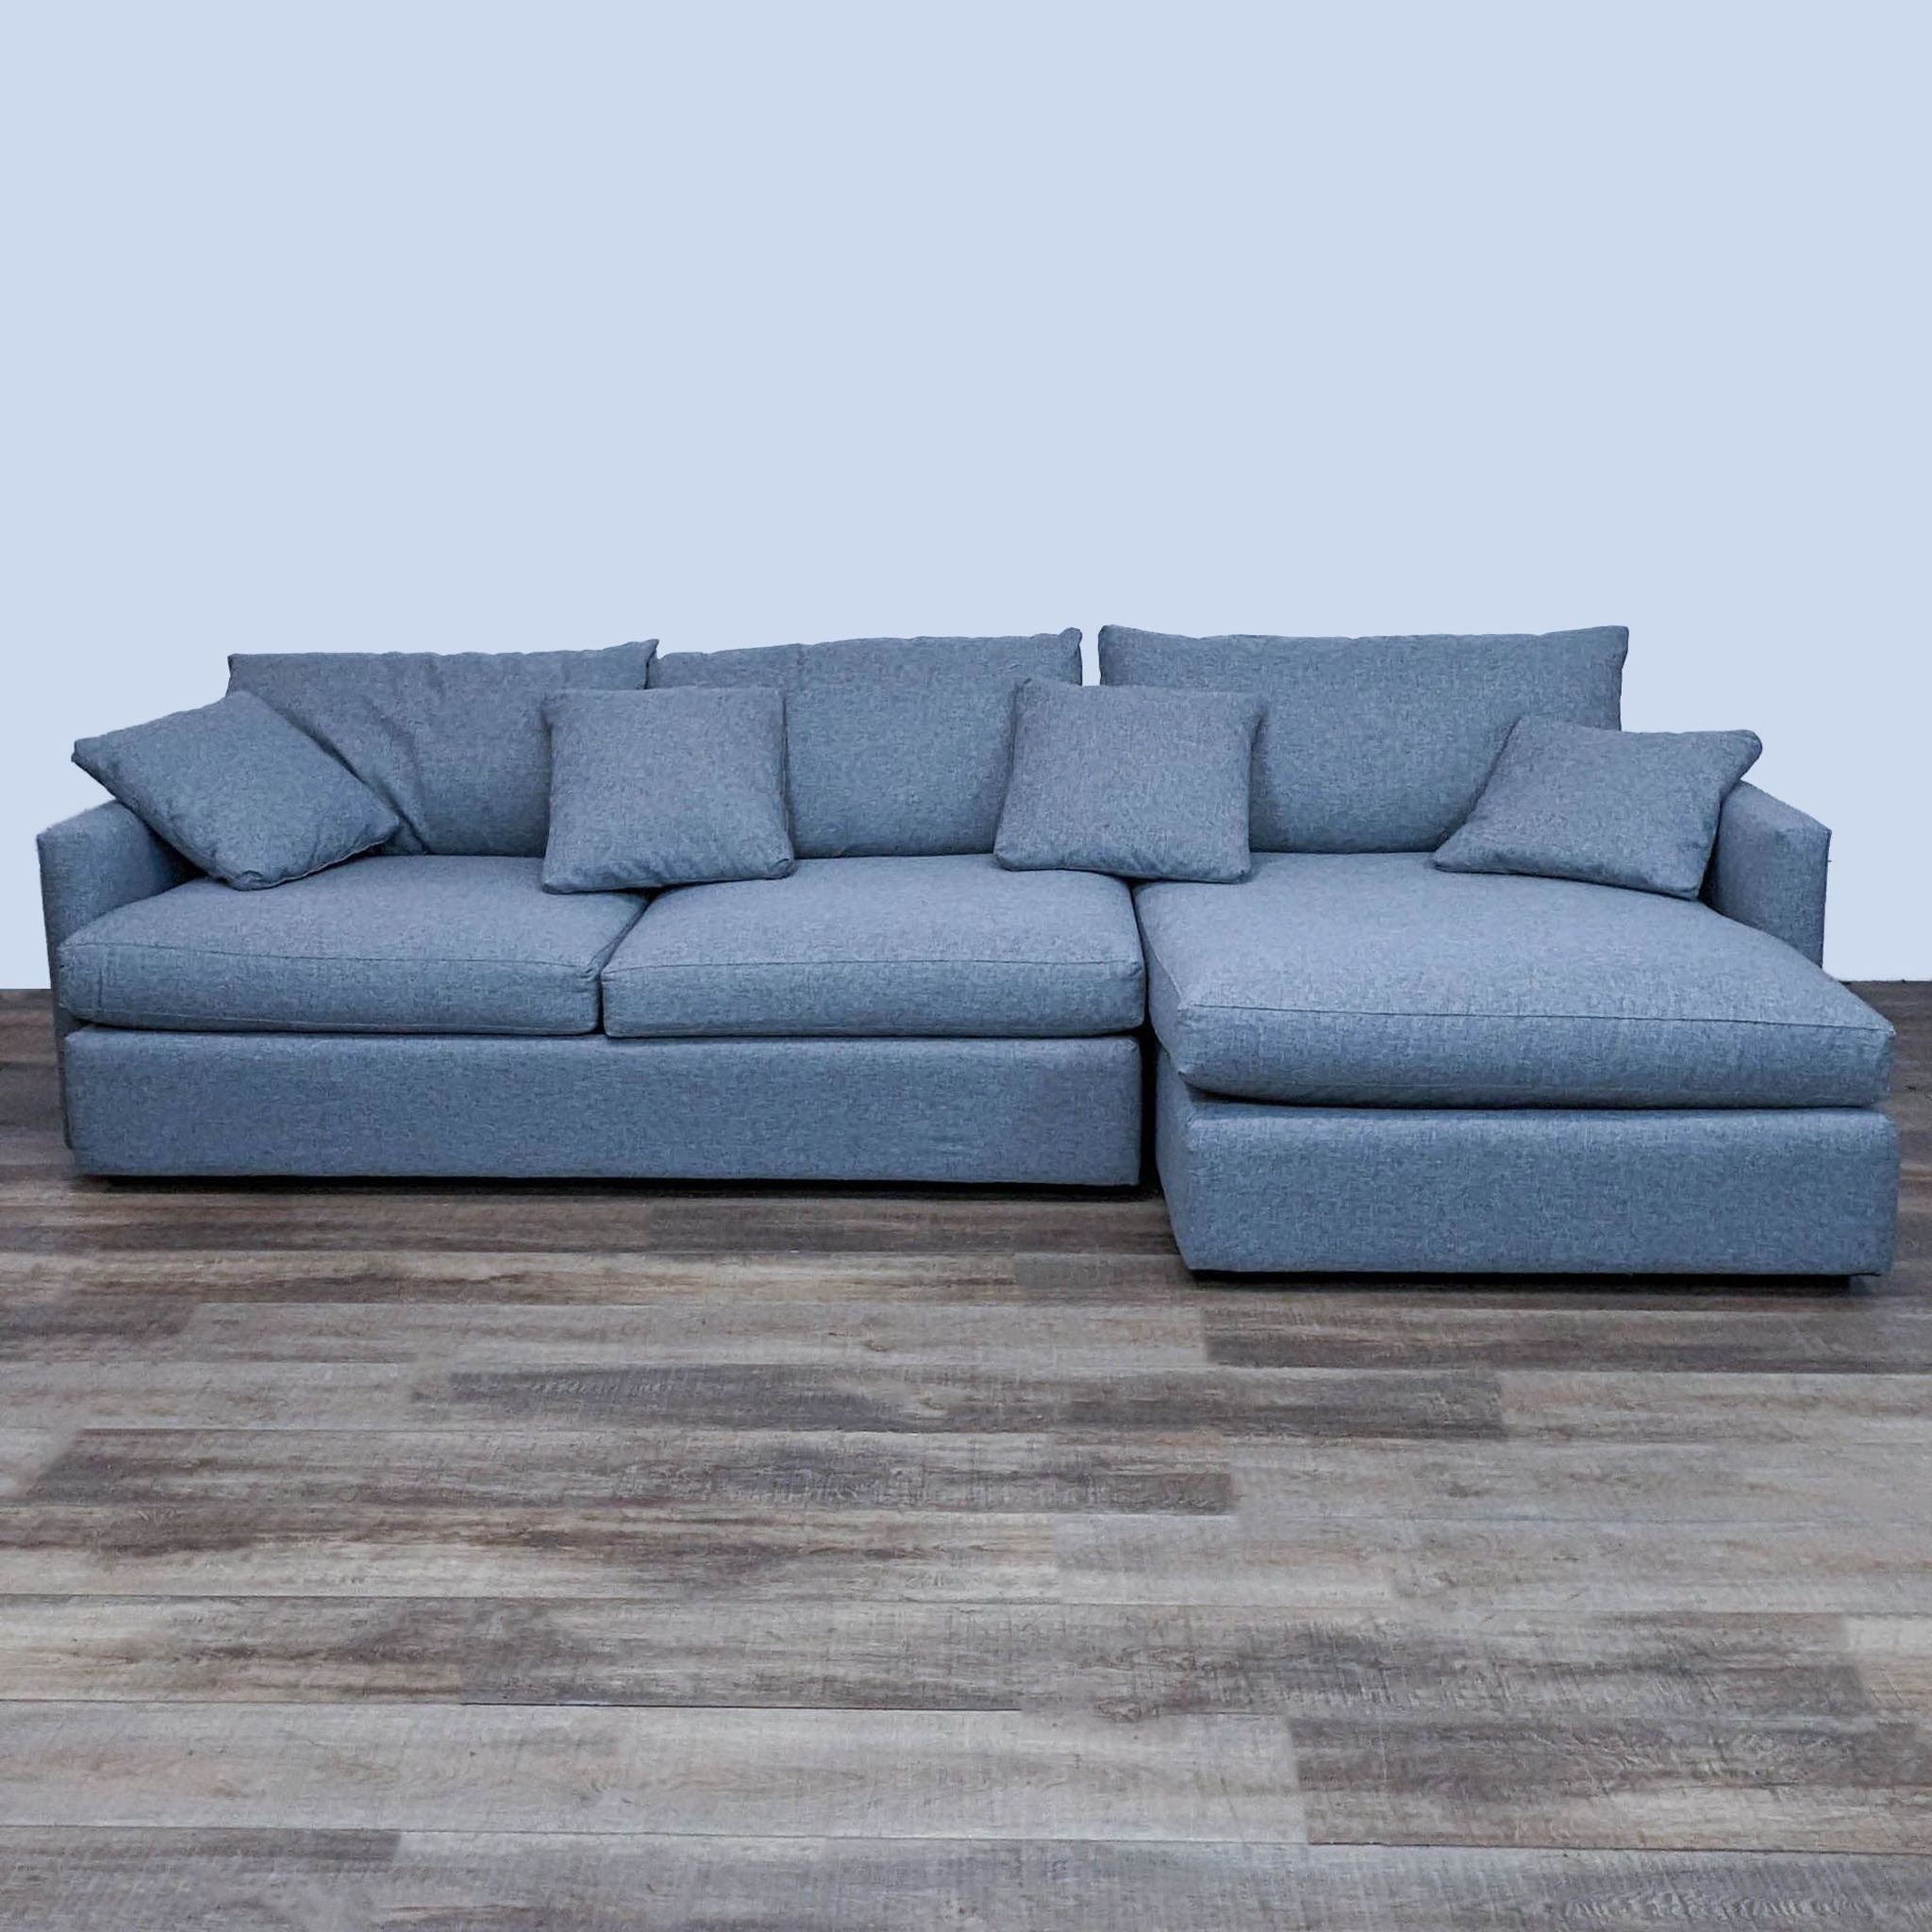 Crate & Barrel sectional sofa in a blue fabric with plush cushions and a chaise lounge, on a wooden floor.